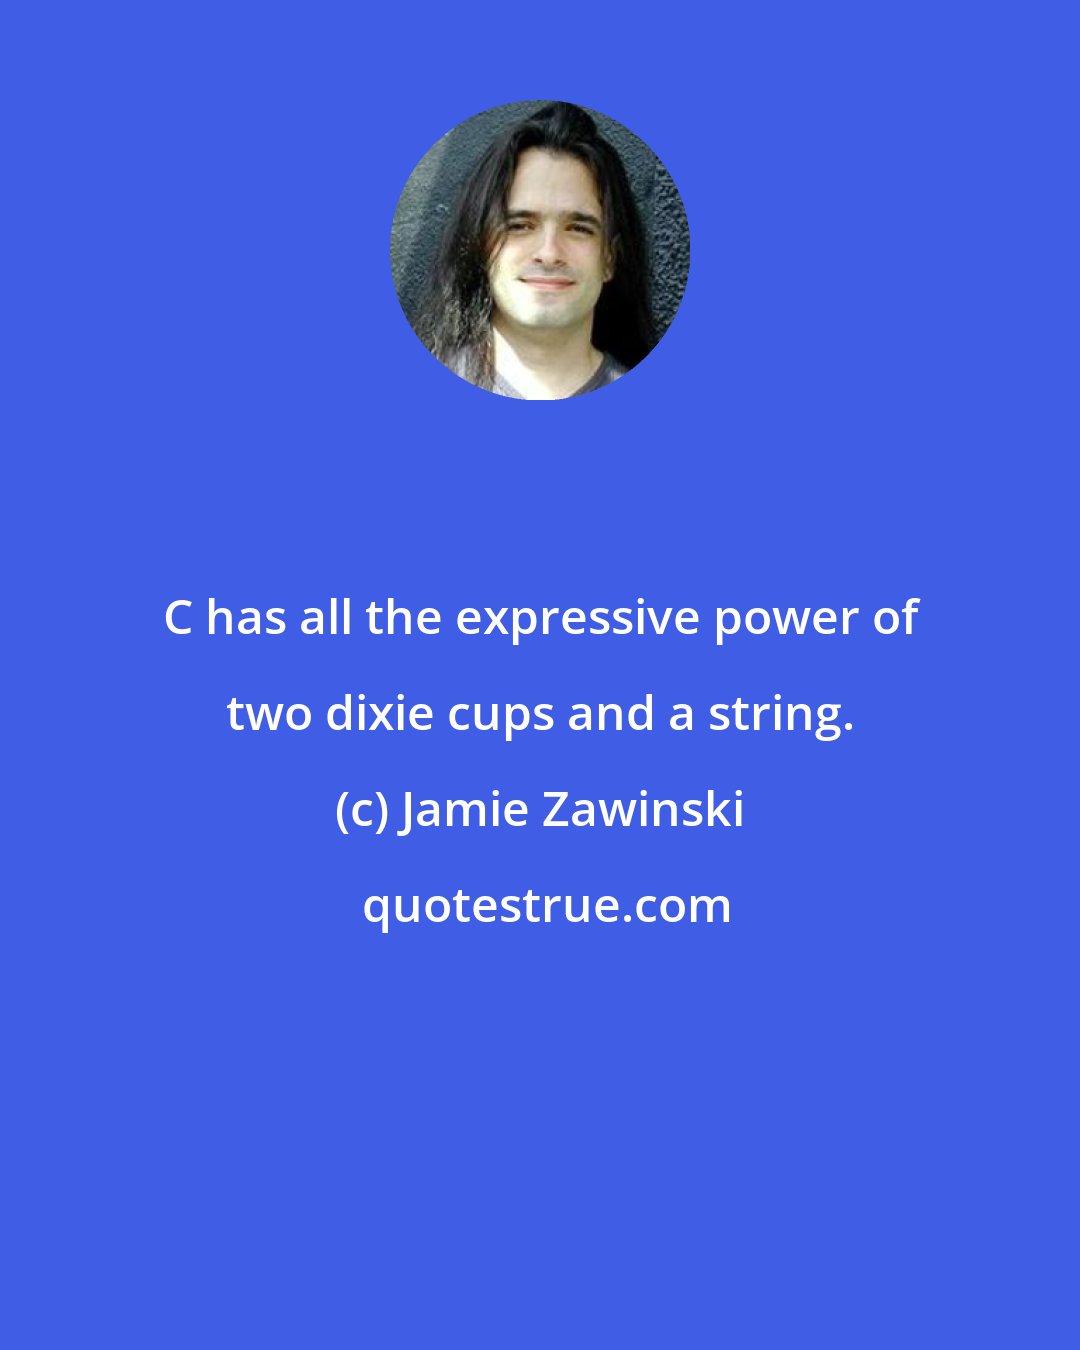 Jamie Zawinski: C has all the expressive power of two dixie cups and a string.